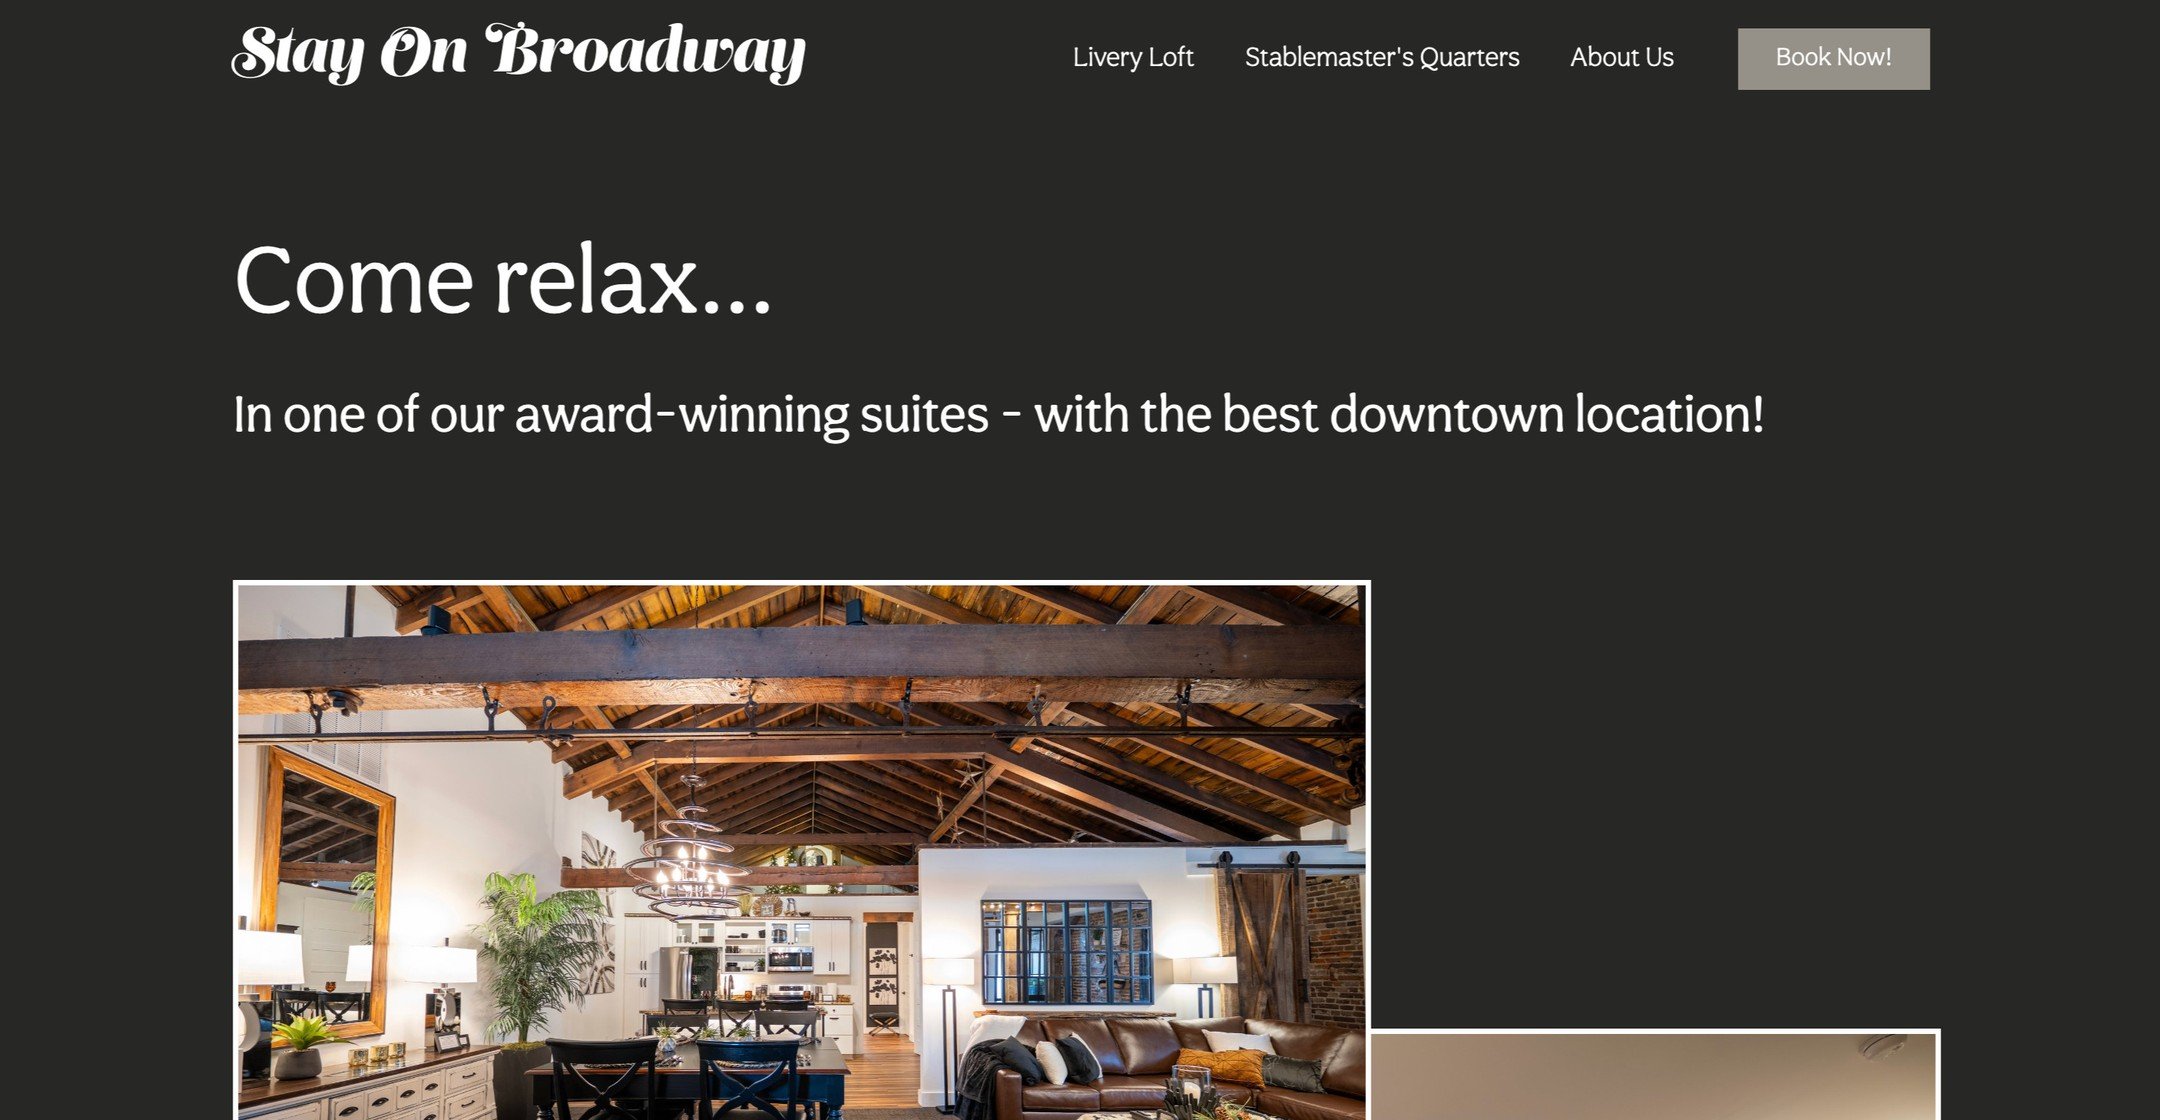 The second project I mentioned yesterday - just finished this week - is photos and a website for Stay On Broadway, a beautiful building downtown. Suzie directed the project that took this 1860 livery stable and turned it into three absolutely gorgeou